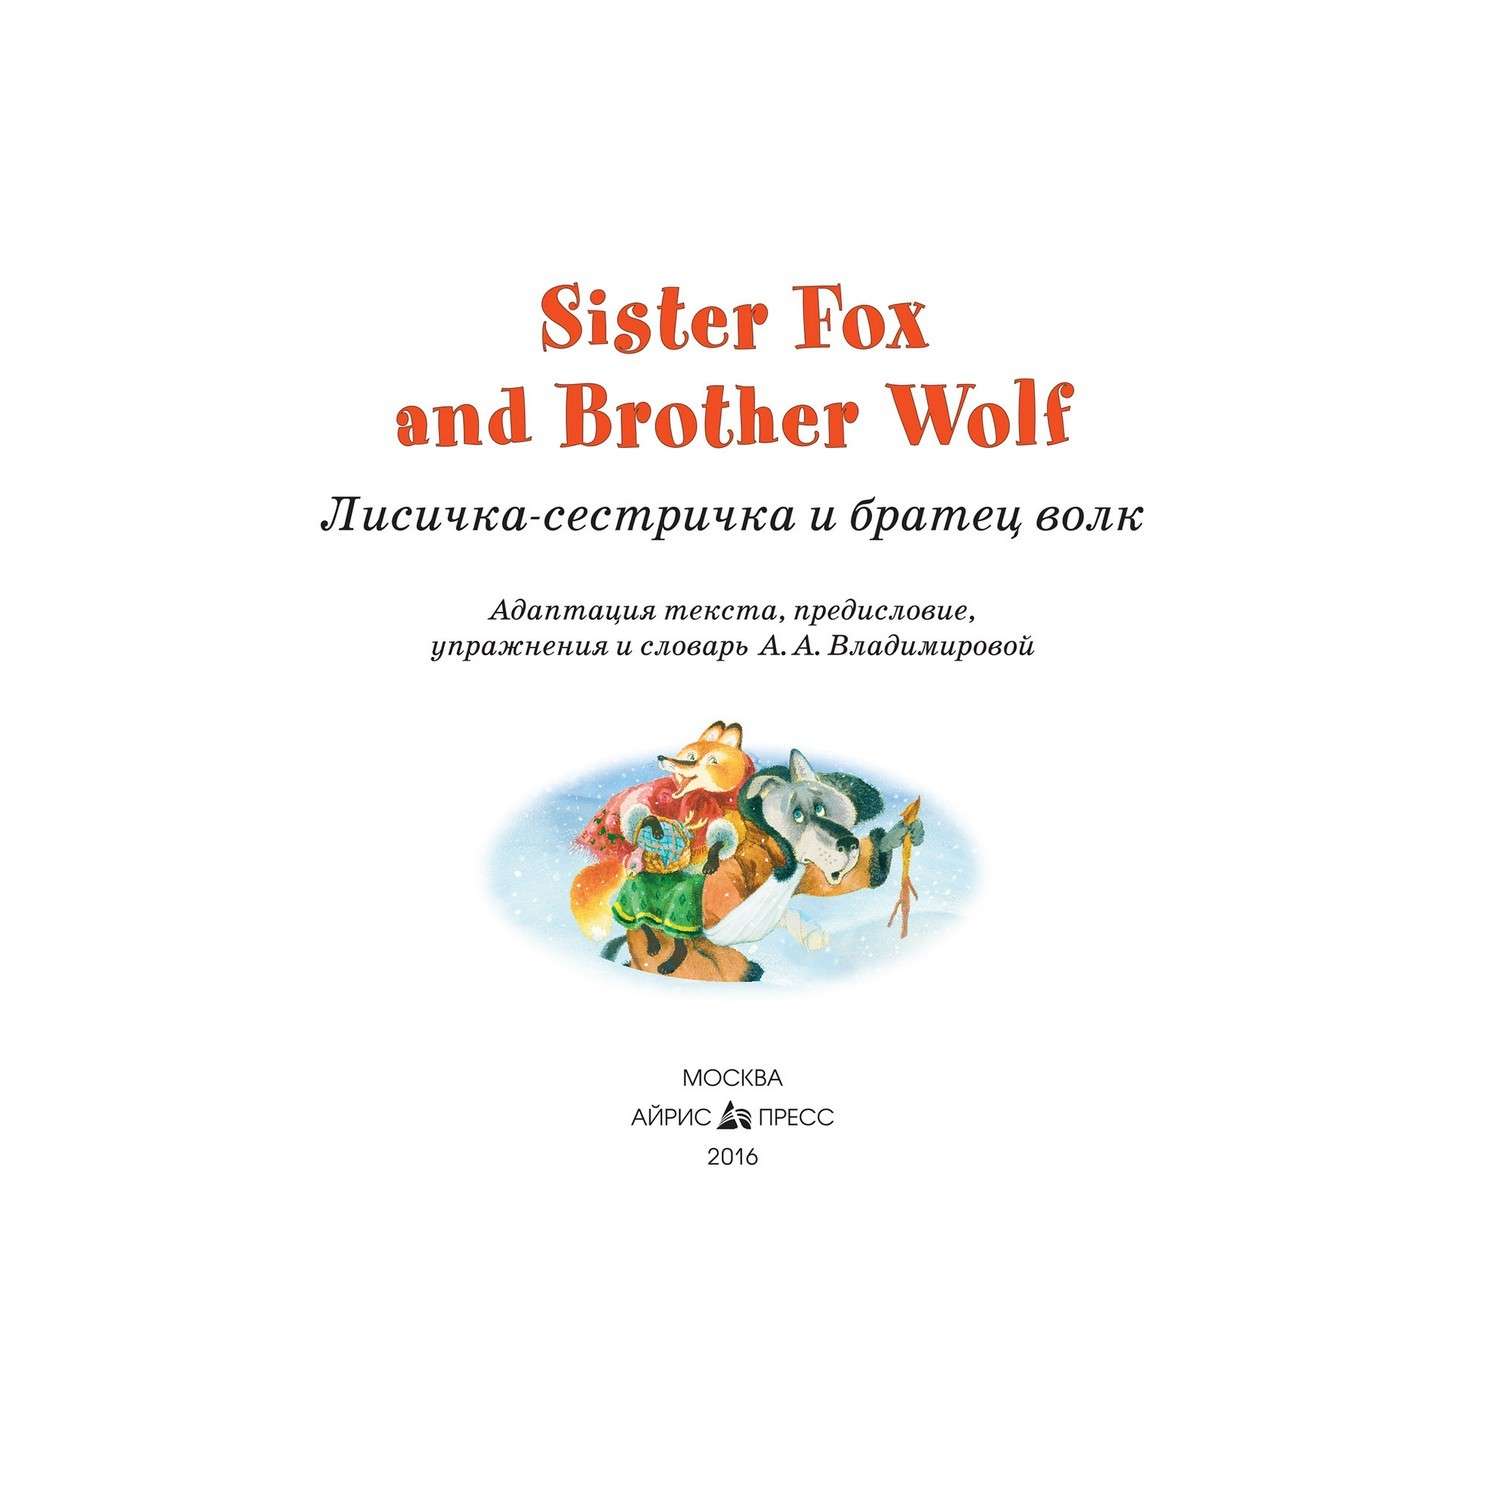 Sister fox. Sister Fox and brother Wolf. Sister Fox and brother Wolf на английском. Братец волк книга. Лисичка-сестричка и братец волк = sister Fox and brother Wolf Владимирова а..